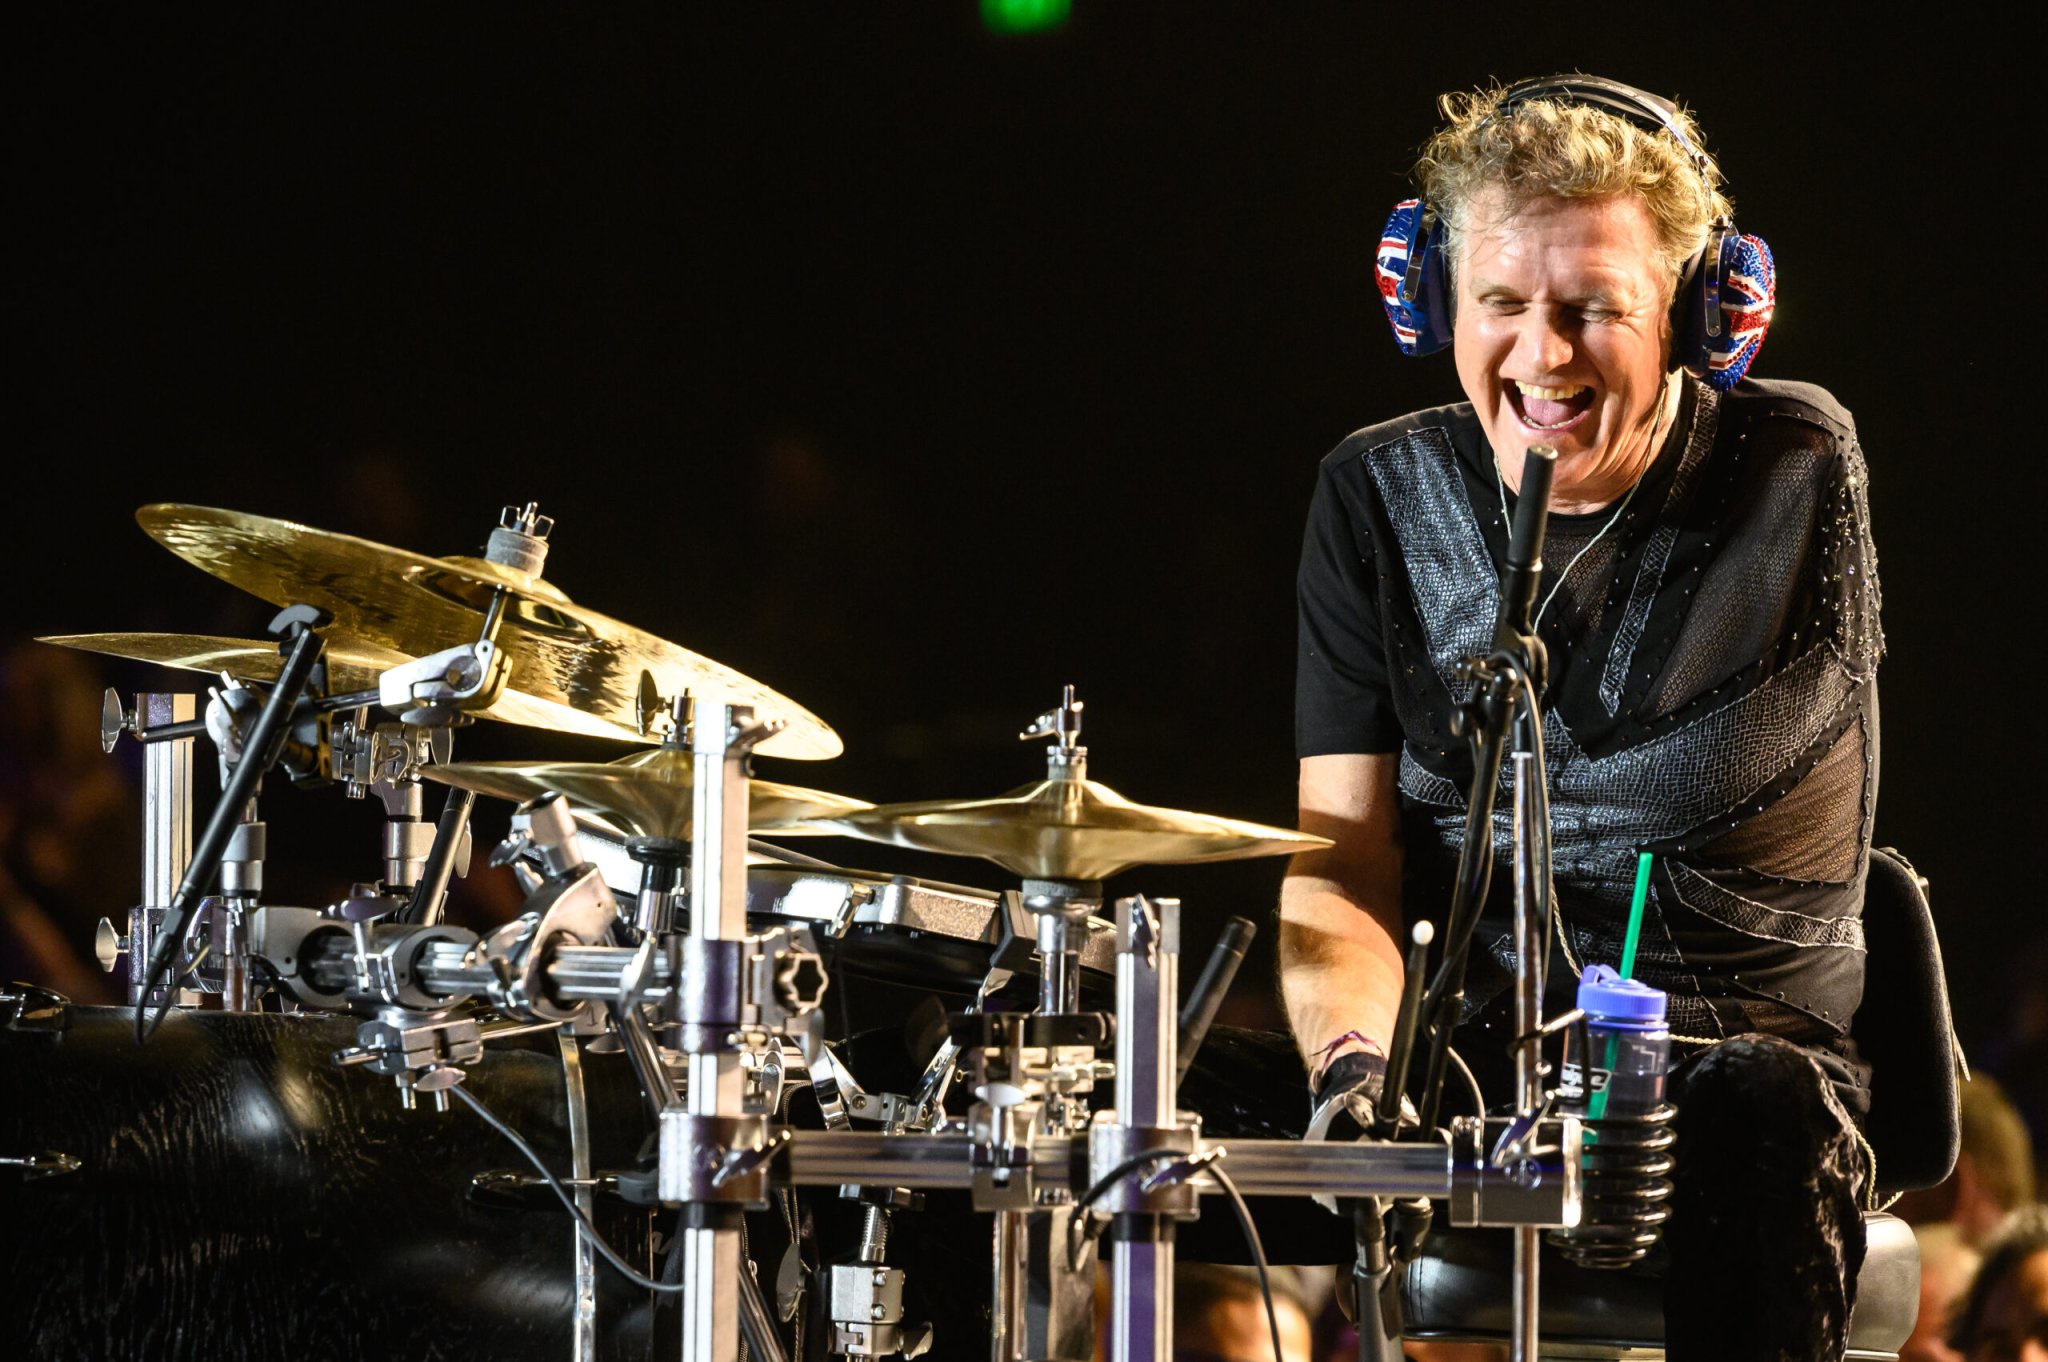 5 Albums I Can't Live Without: Rick Allen of Def Leppard